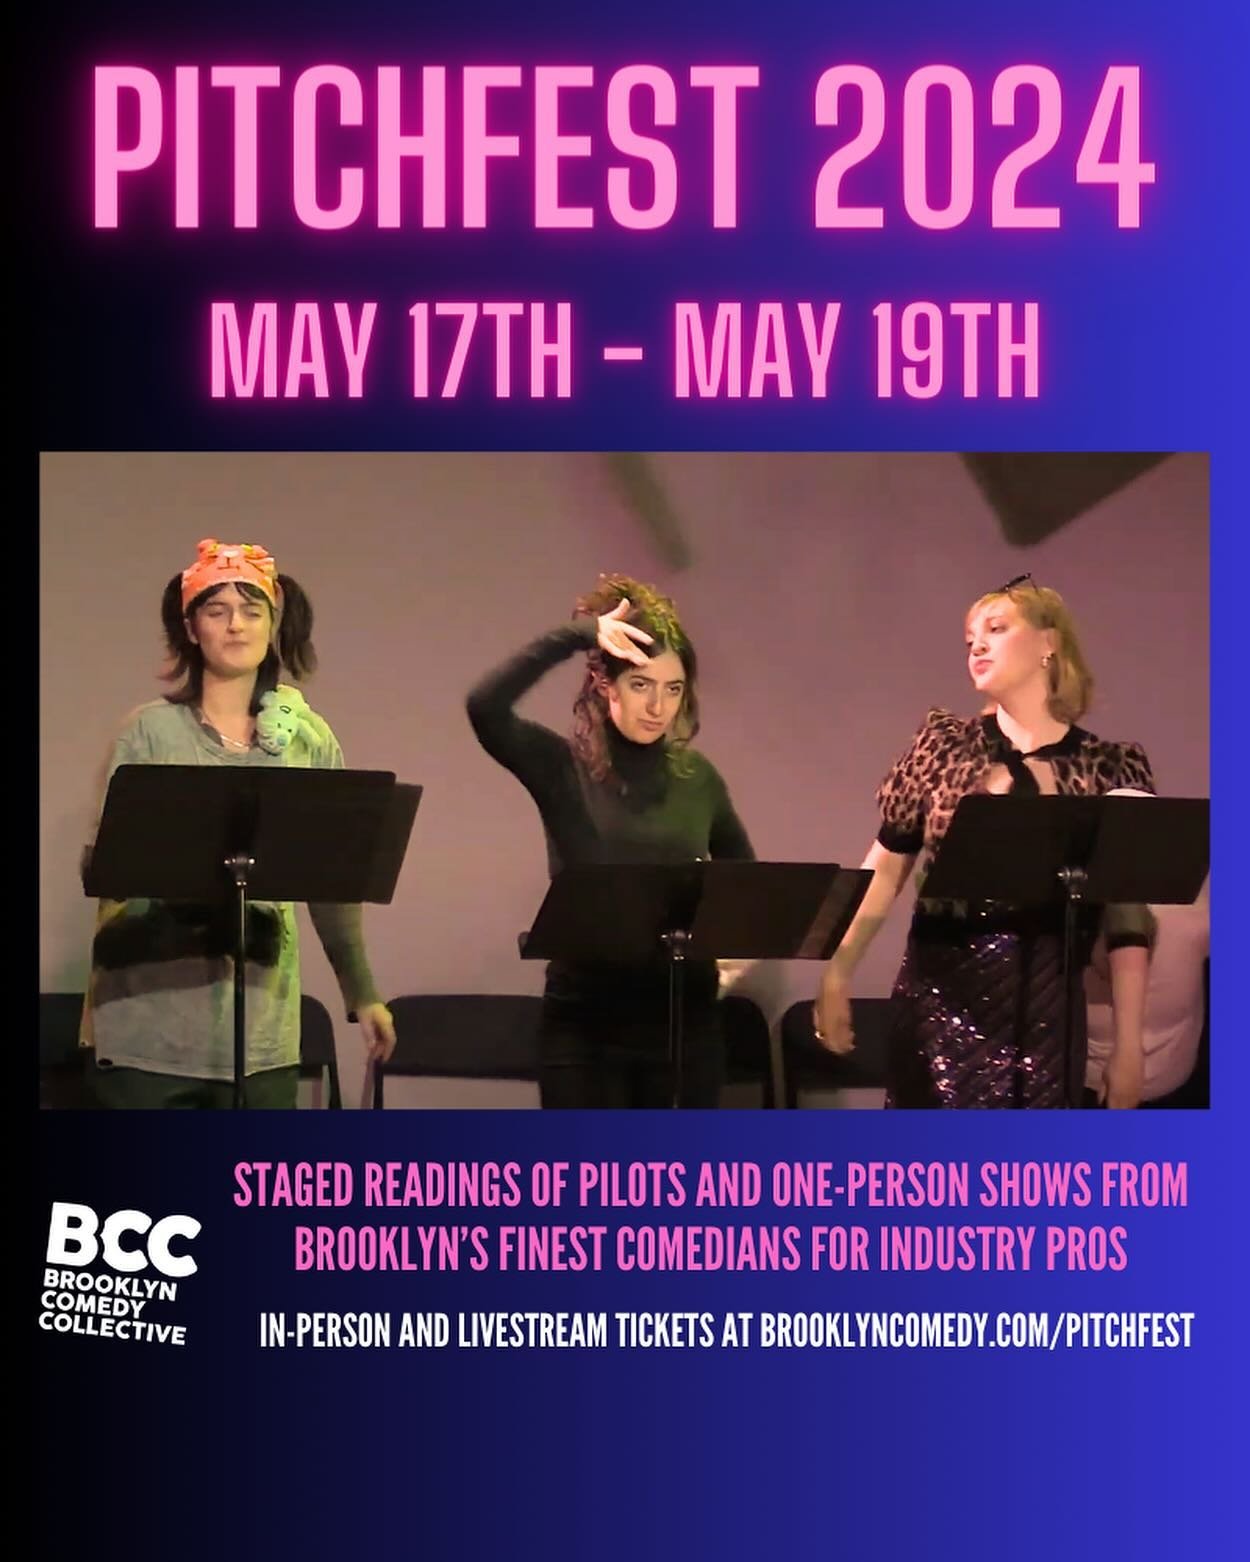 Breaking News! Work featured in the inaugural Pitchfest recently sold and is in development with a major comedy network! Pitchfest 2024 is next week, May 17th-19th! Pitchfest is a festival of pilots &amp; one-person shows brought to life onstage by y